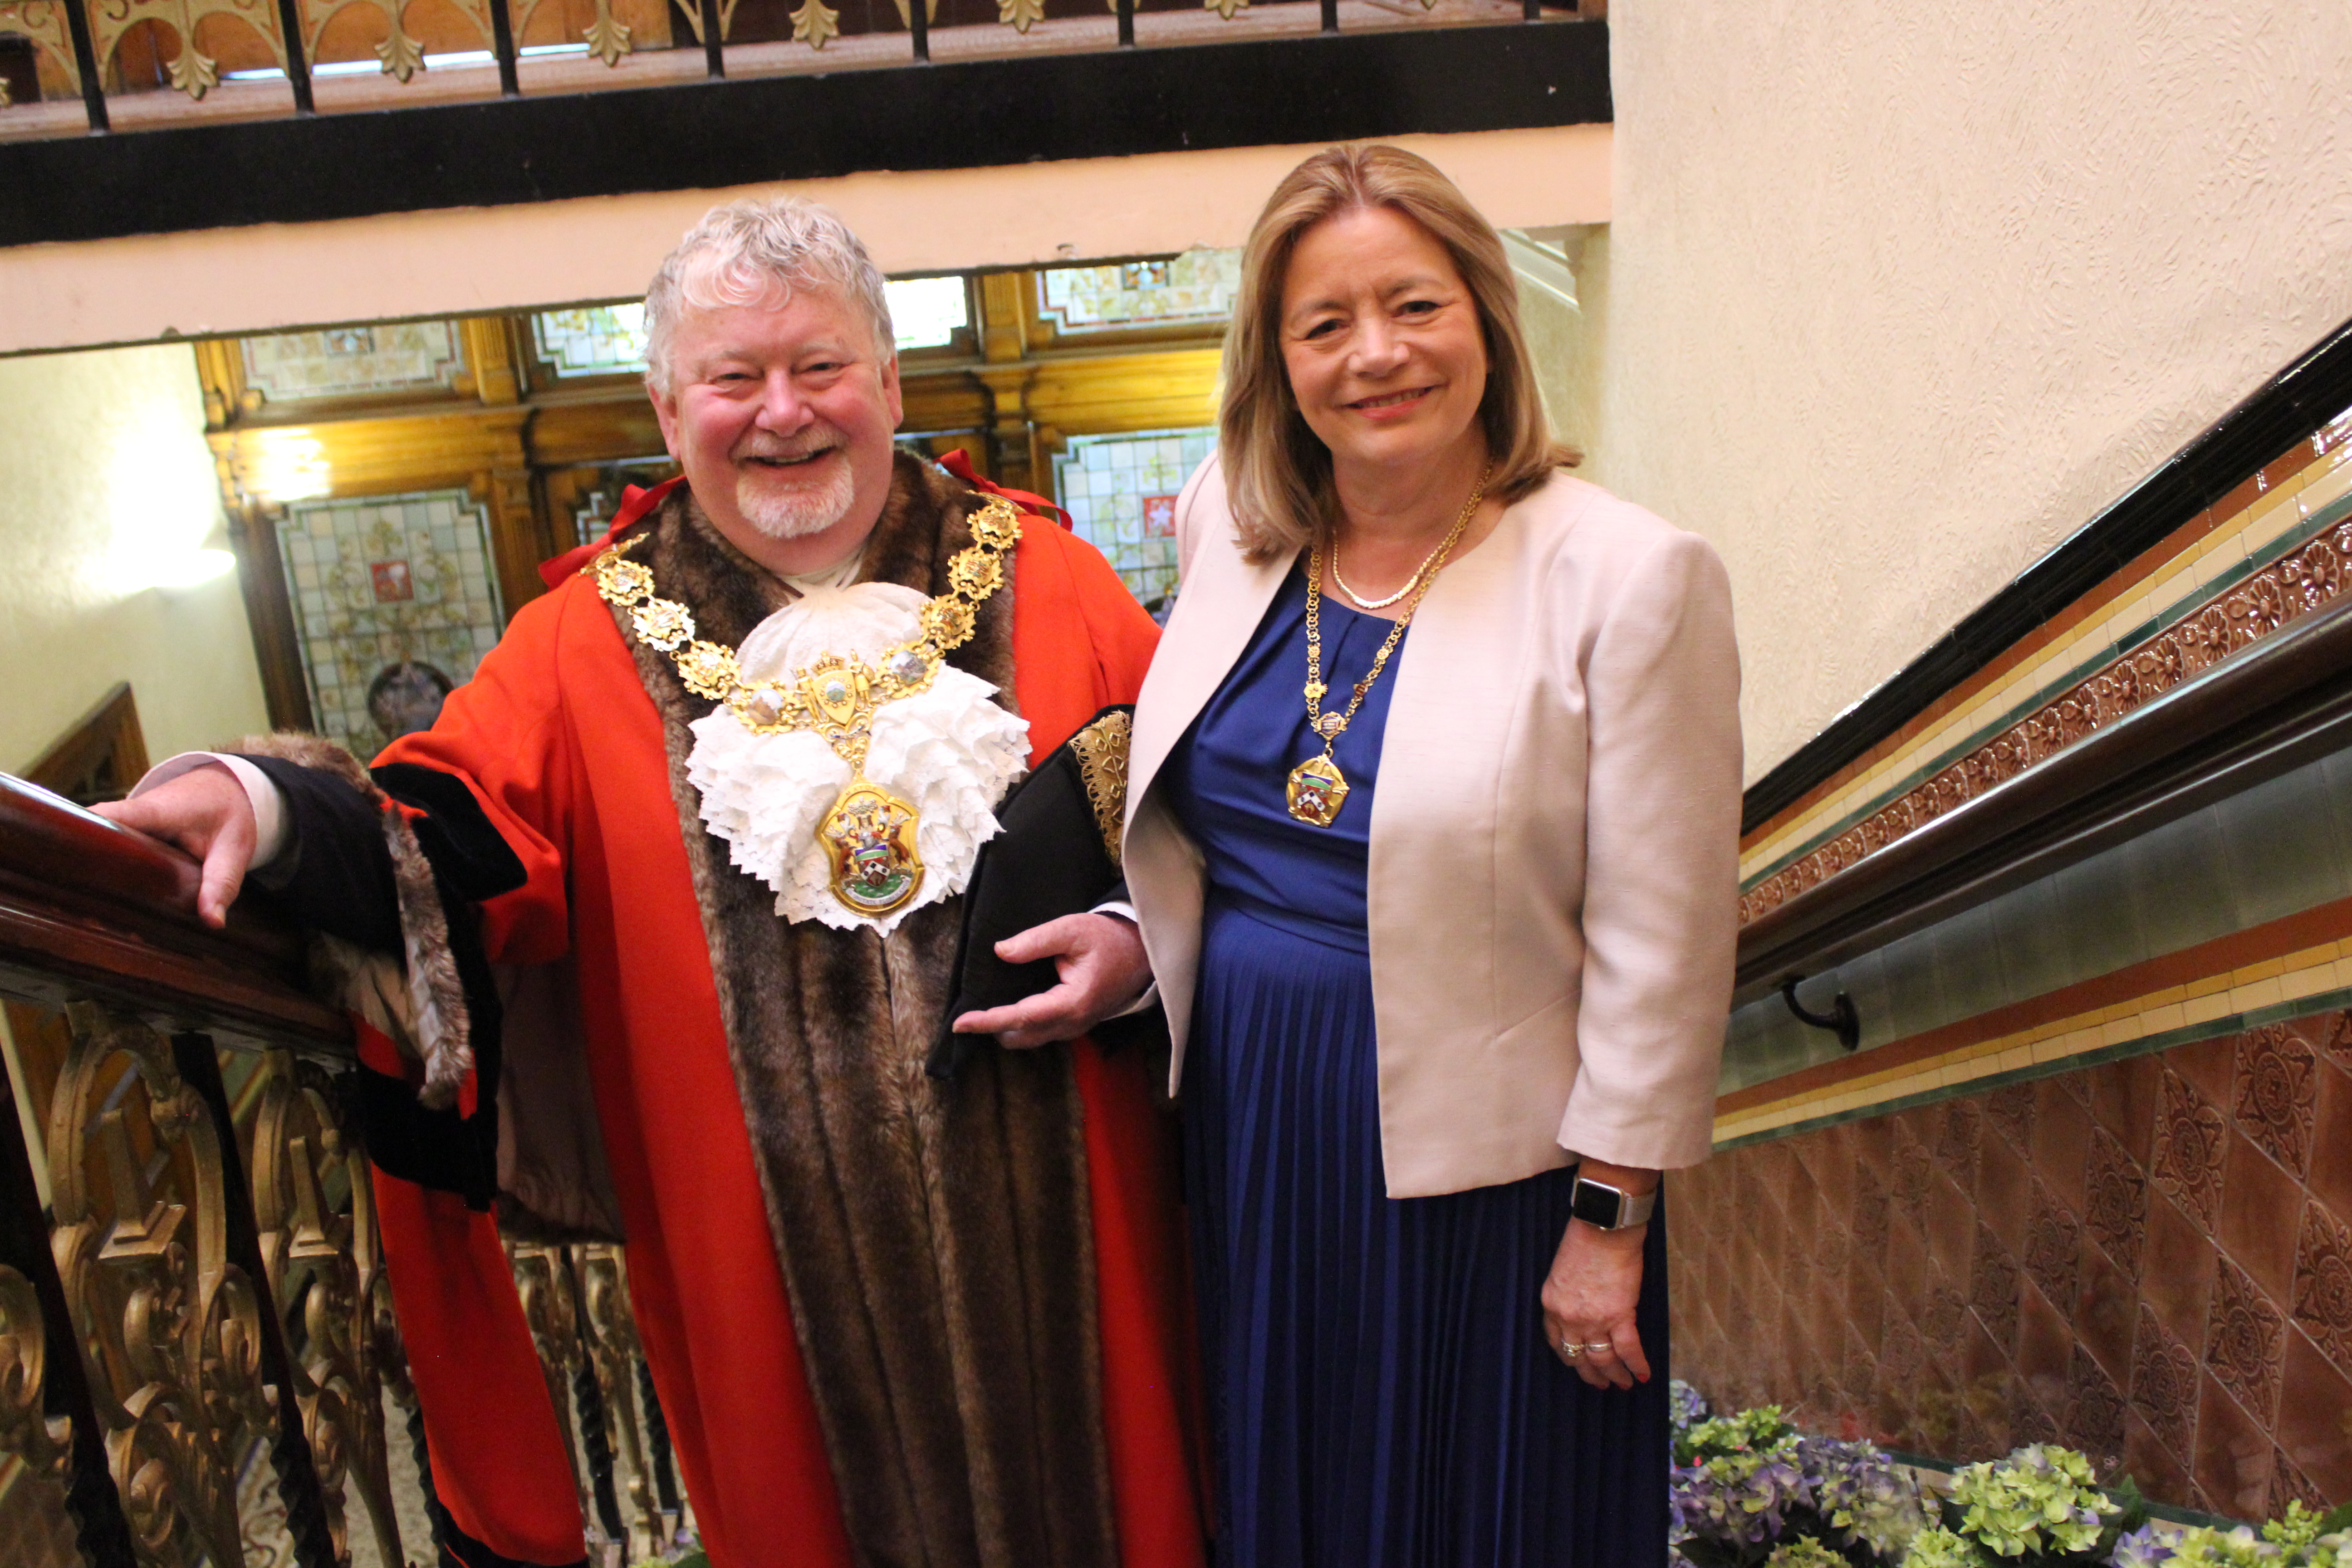 The Mayor of Pendle invites you to see inside Nelson Town Hall